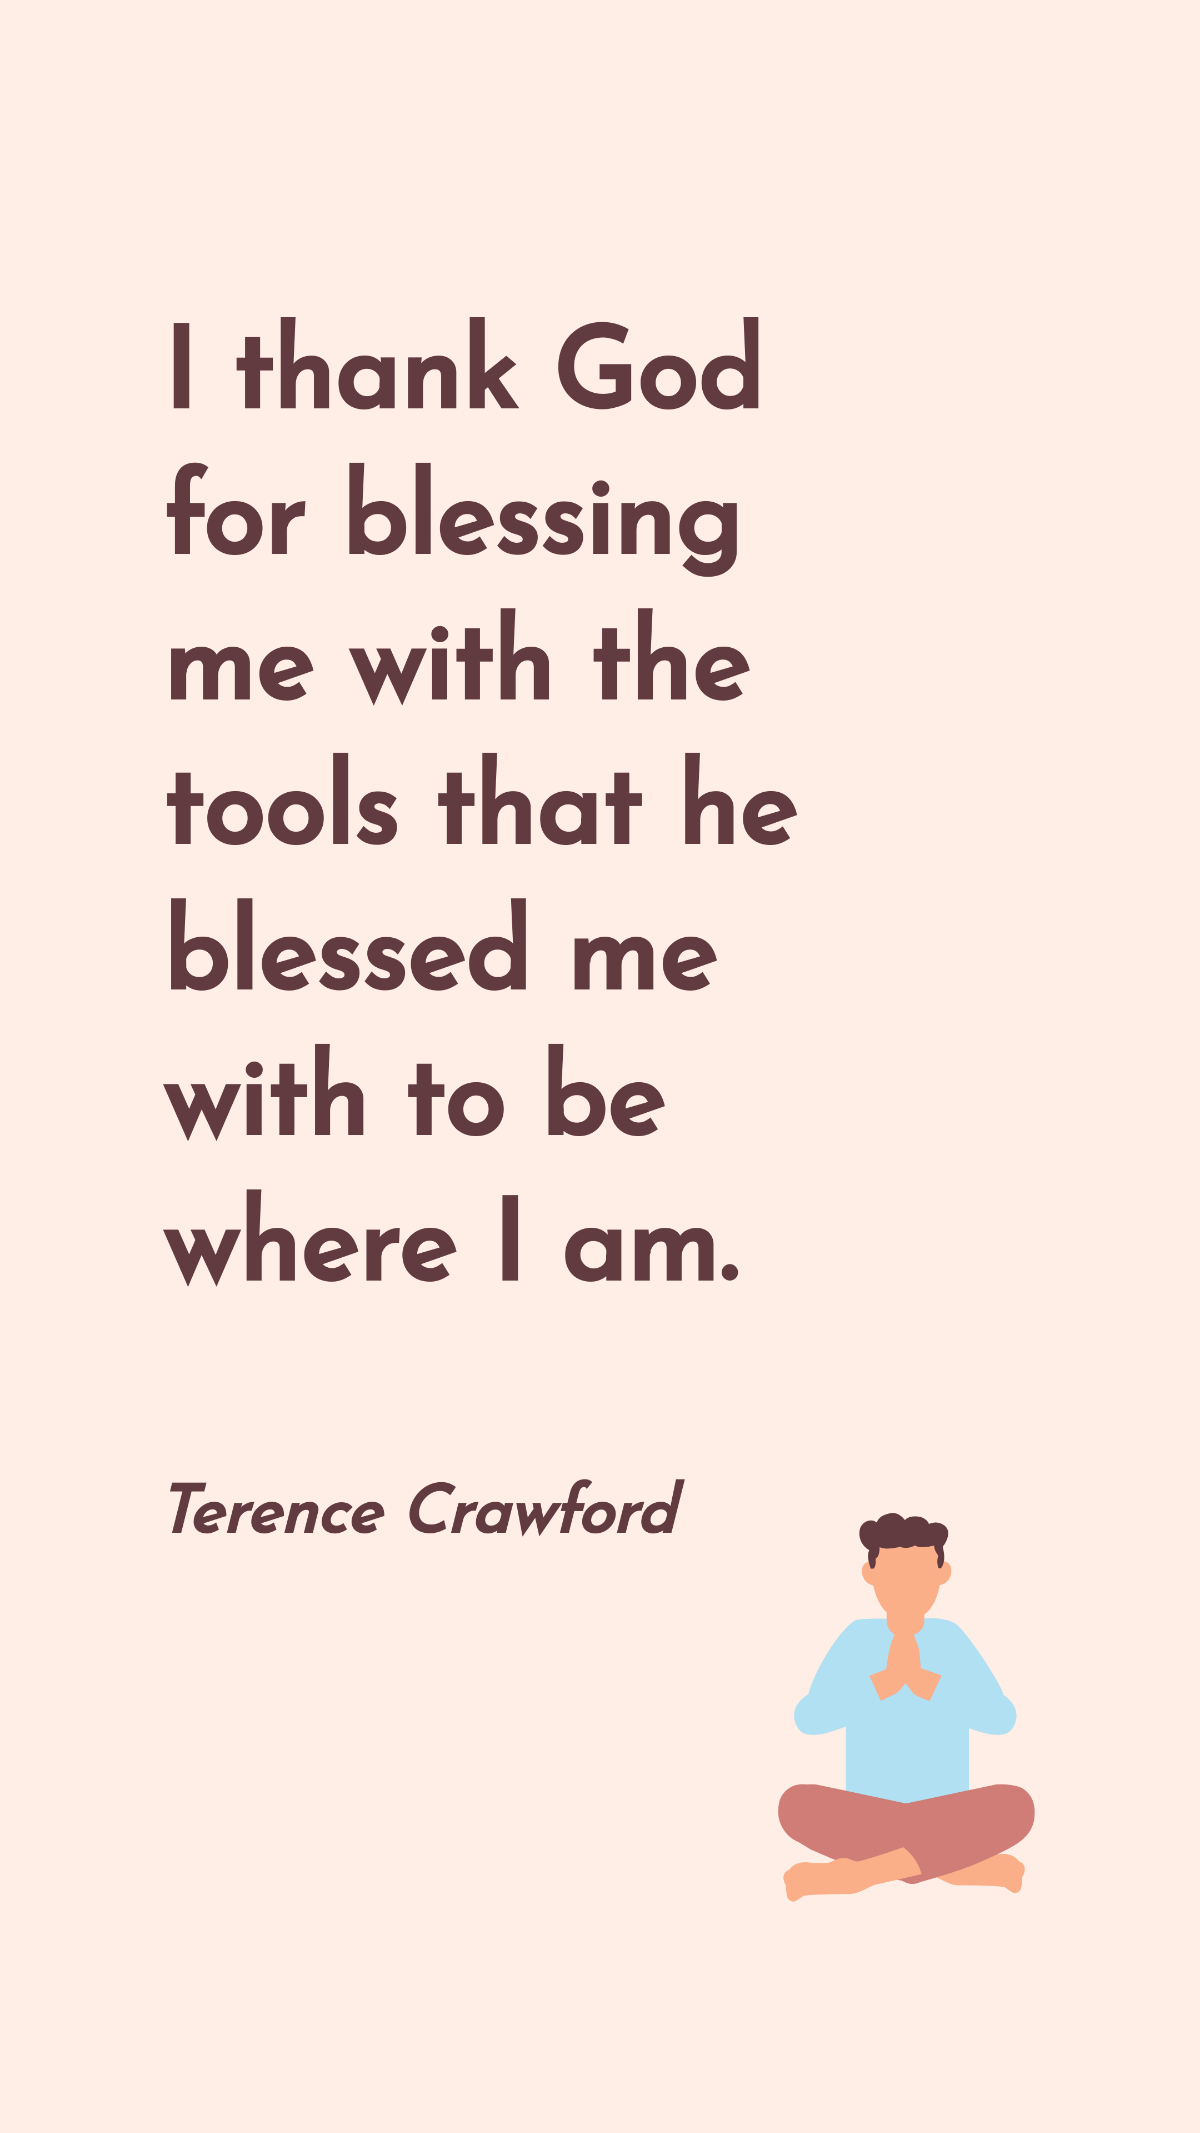 Free Terence Crawford - I thank God for blessing me with the tools that he blessed me with to be where I am. Template